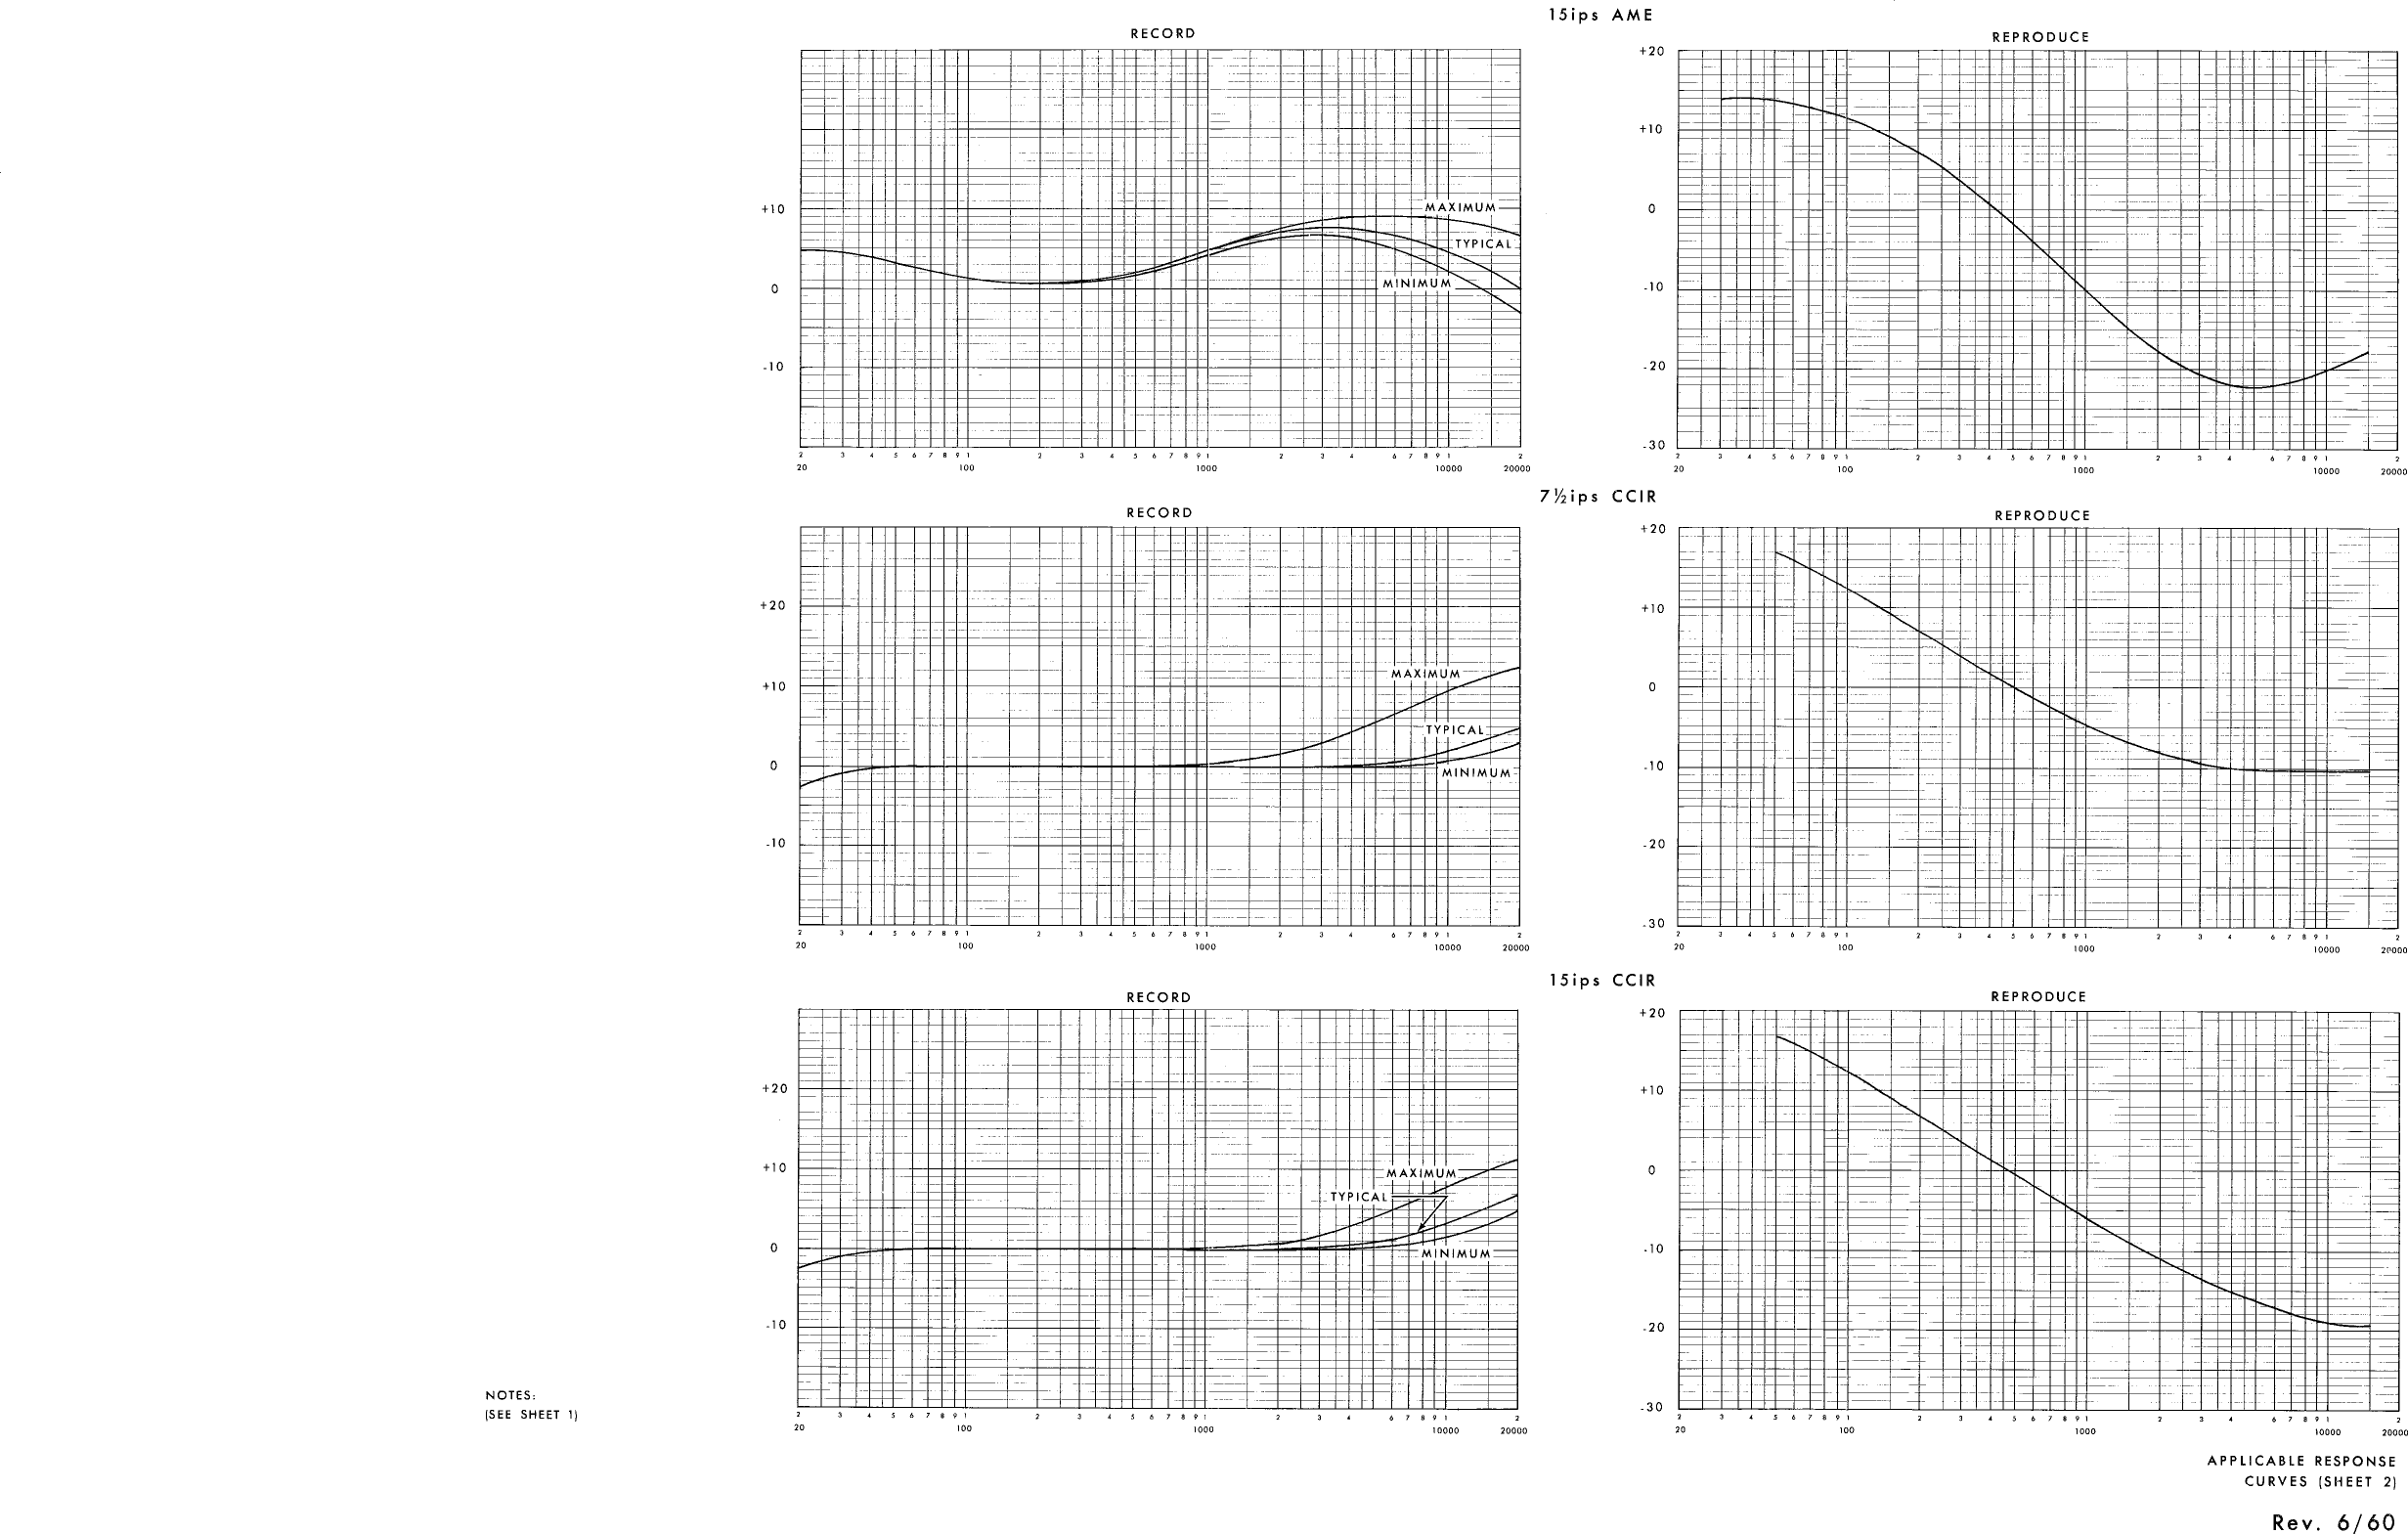 Page 2 of 5 - Ampex 354 Electronics